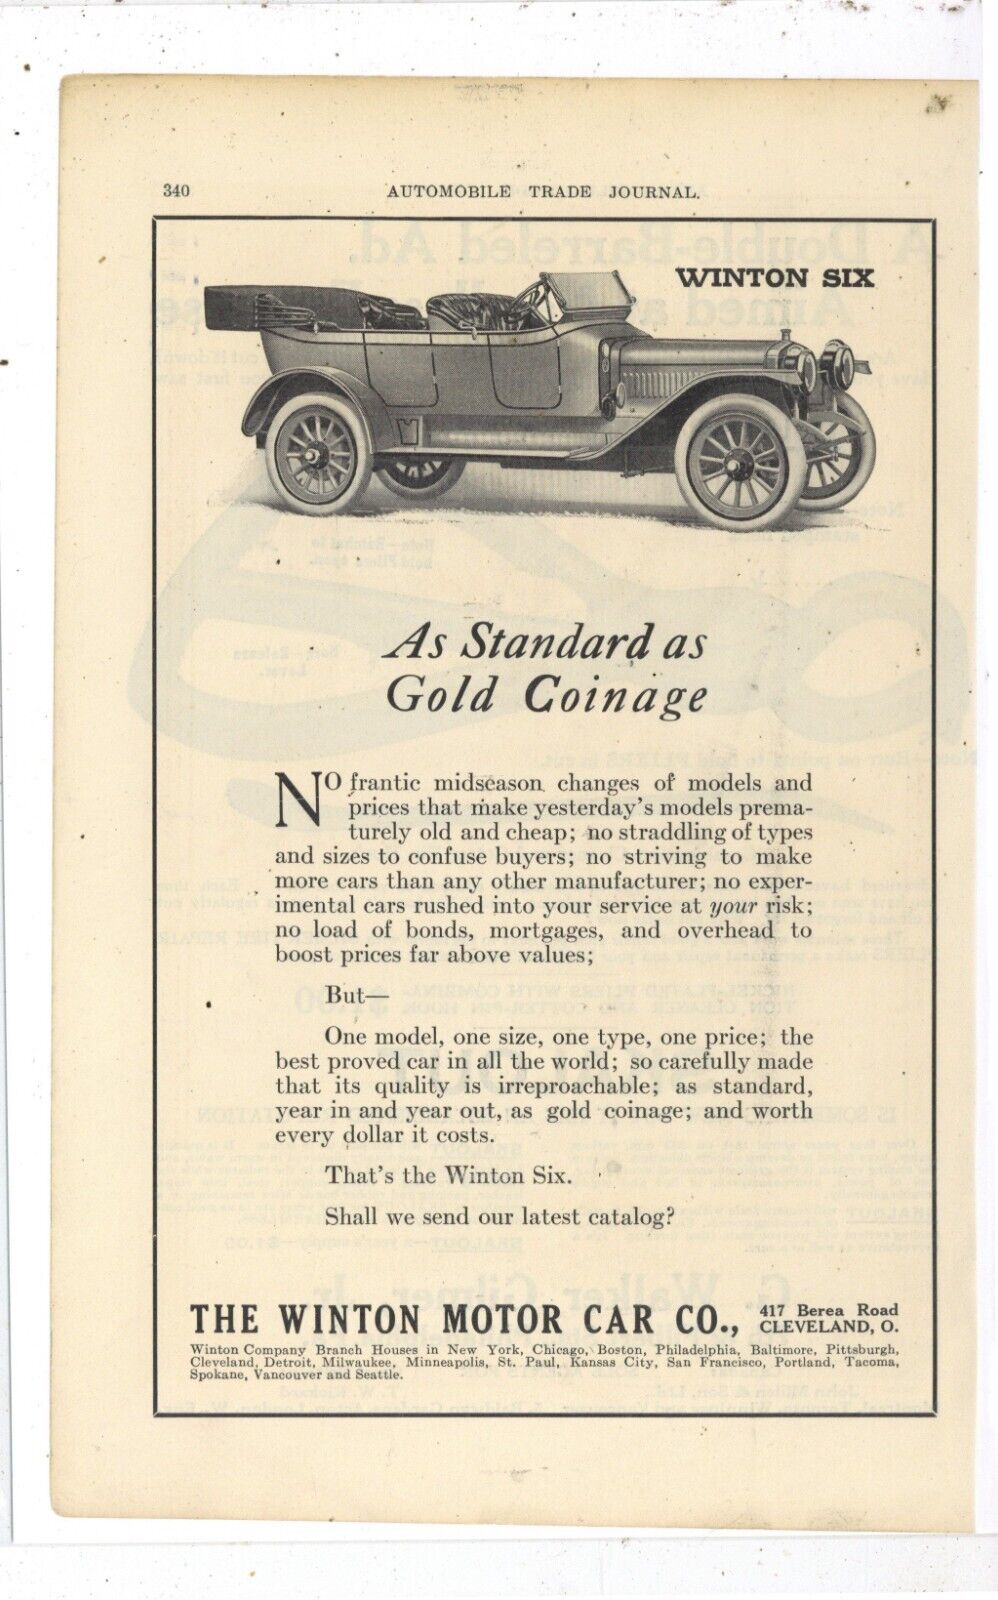 1913 Winton Motor Car Co. Ad: As Standard as Gold Coinage  Cleveland, OhiO